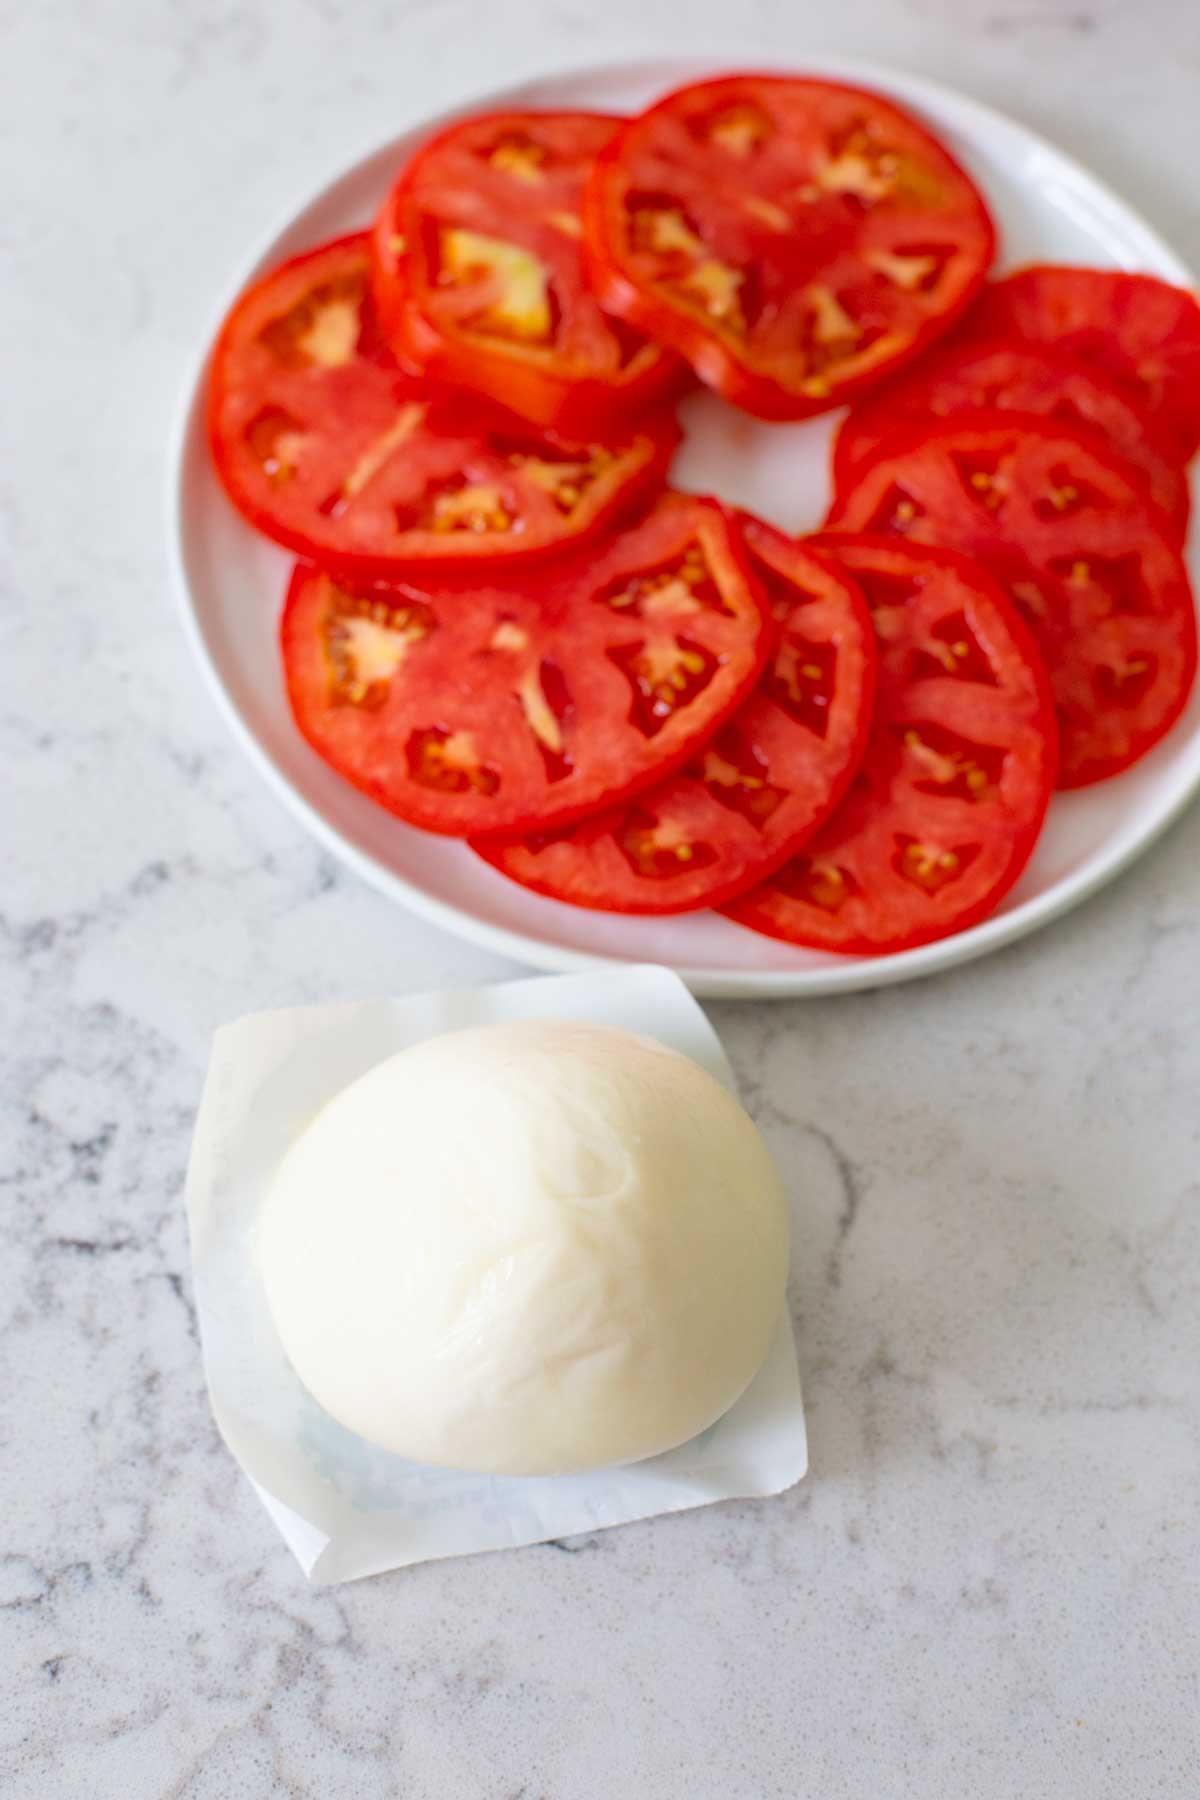 The tomatoes have been placed in a spiral circle on a white plate.